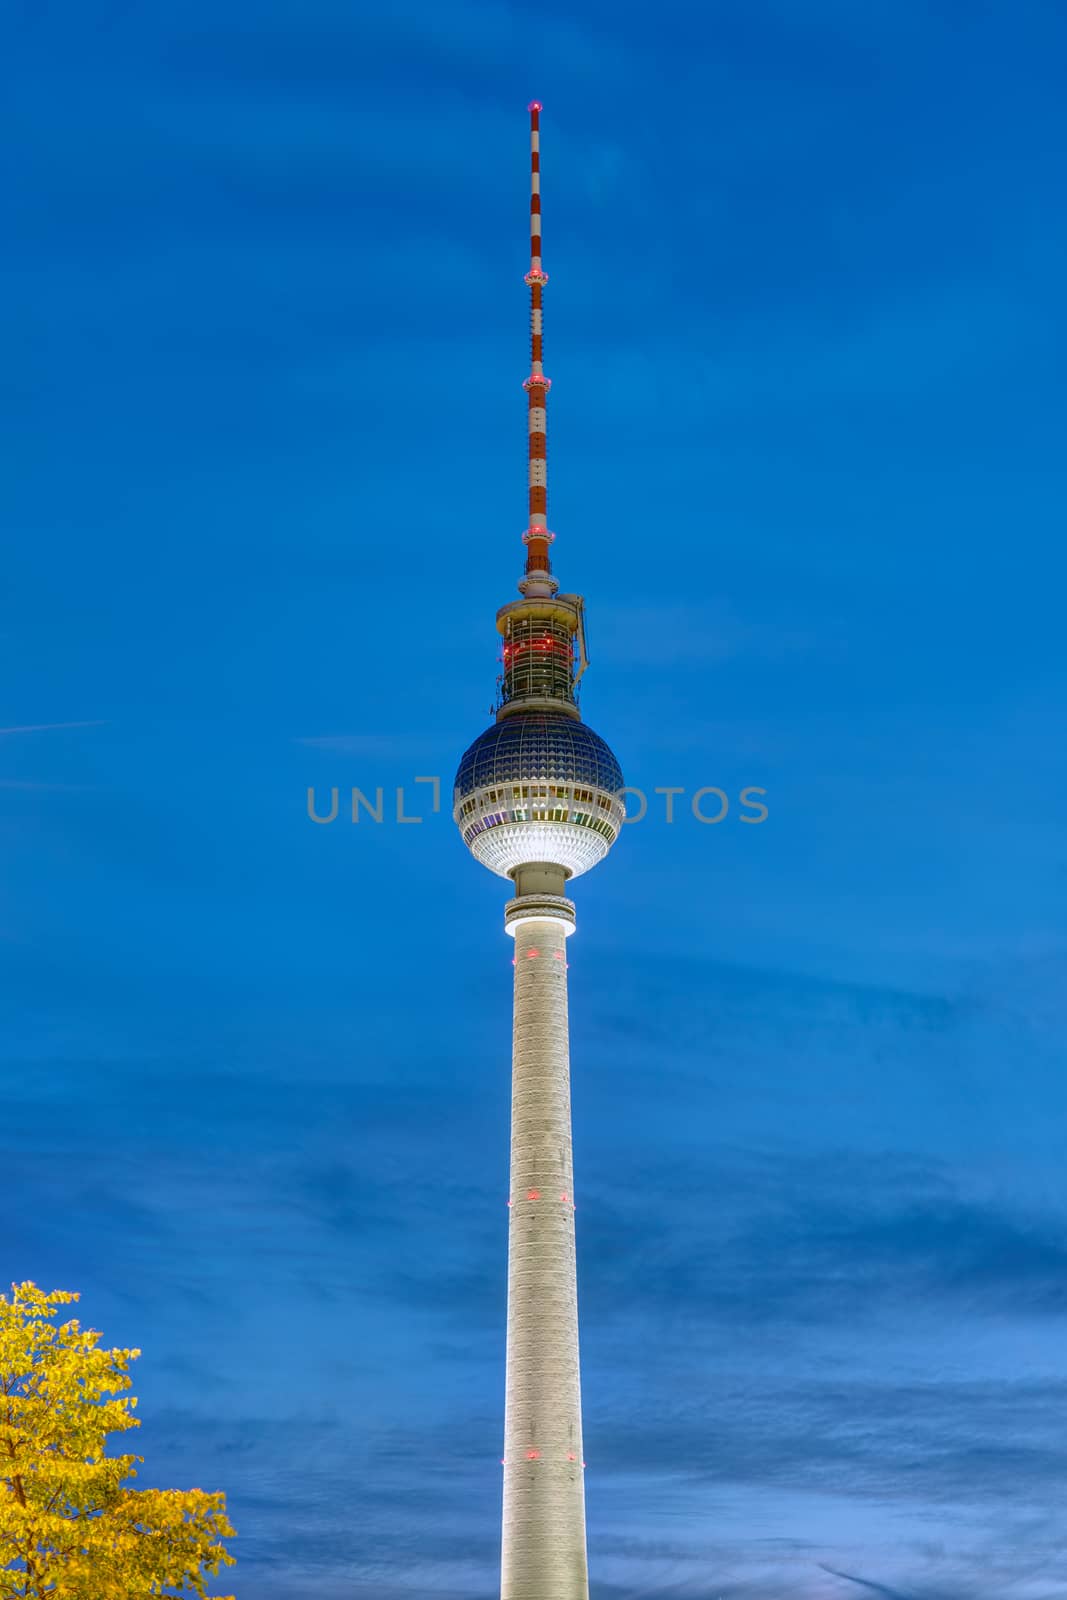 The famous Television Tower in Berlin illuminated at night